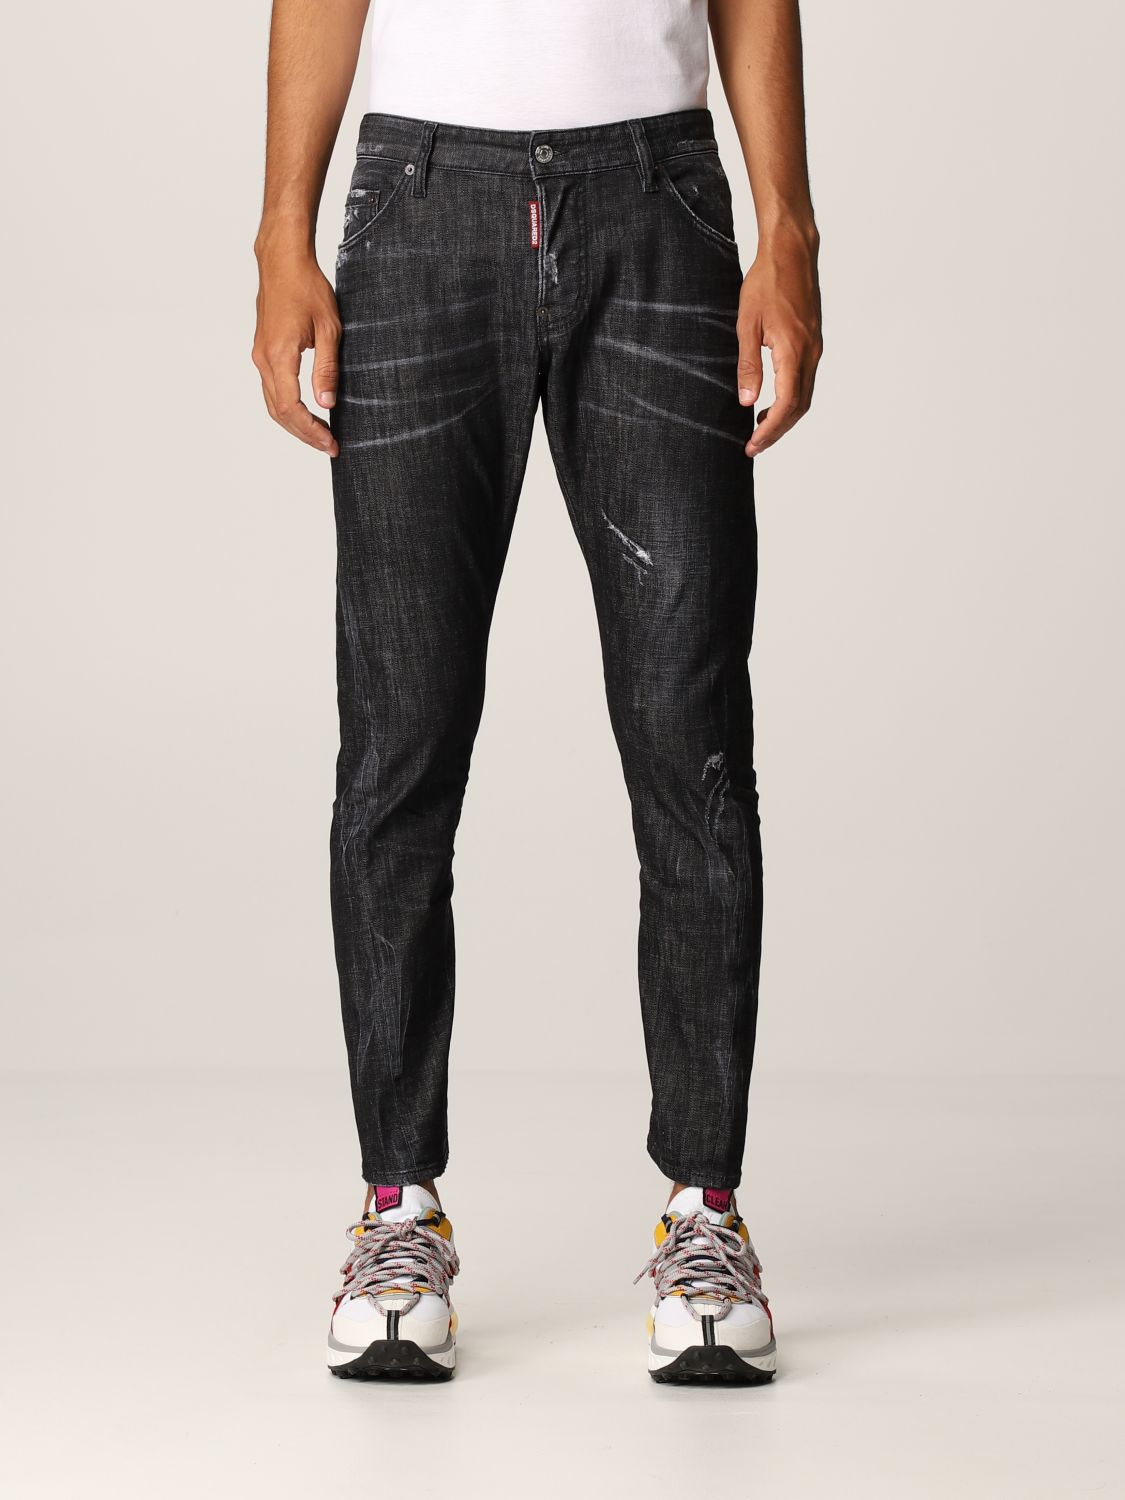 DSQUARED2: Sexy Twist jeans in washed denim - Grey | Dsquared2